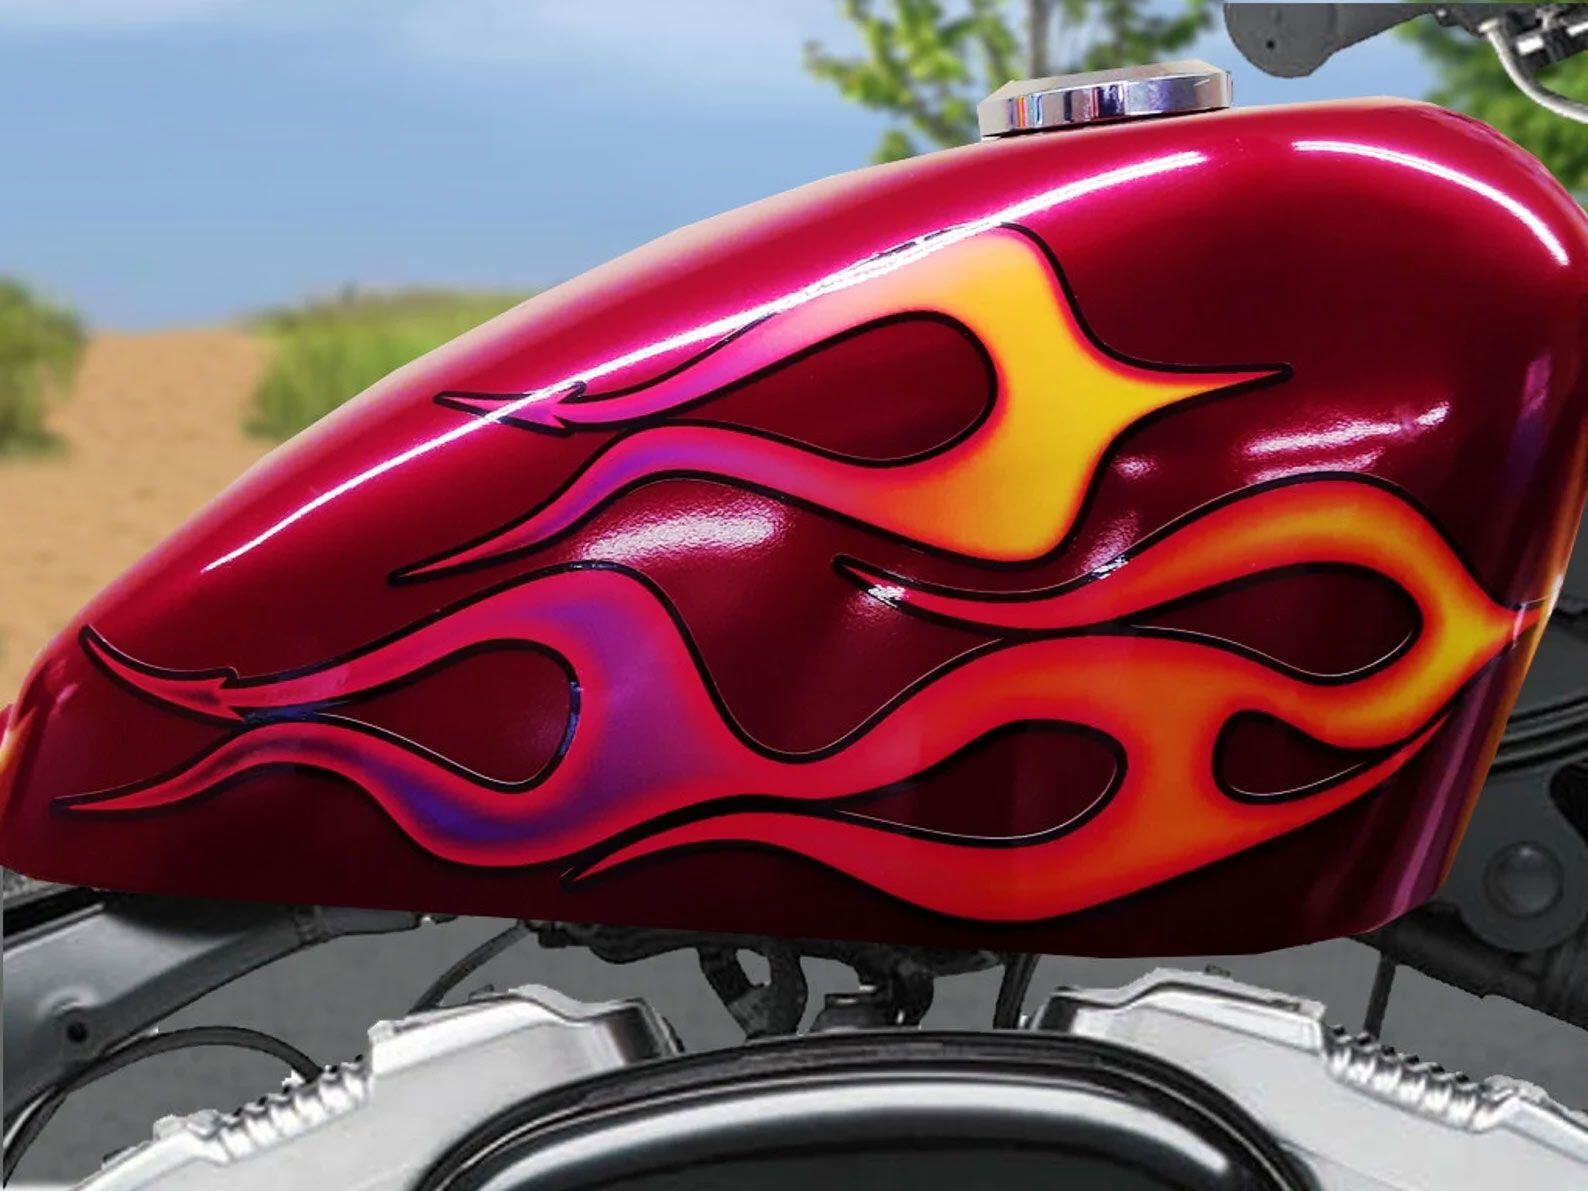 That which burns, never returns. Flame decals keep things hot.